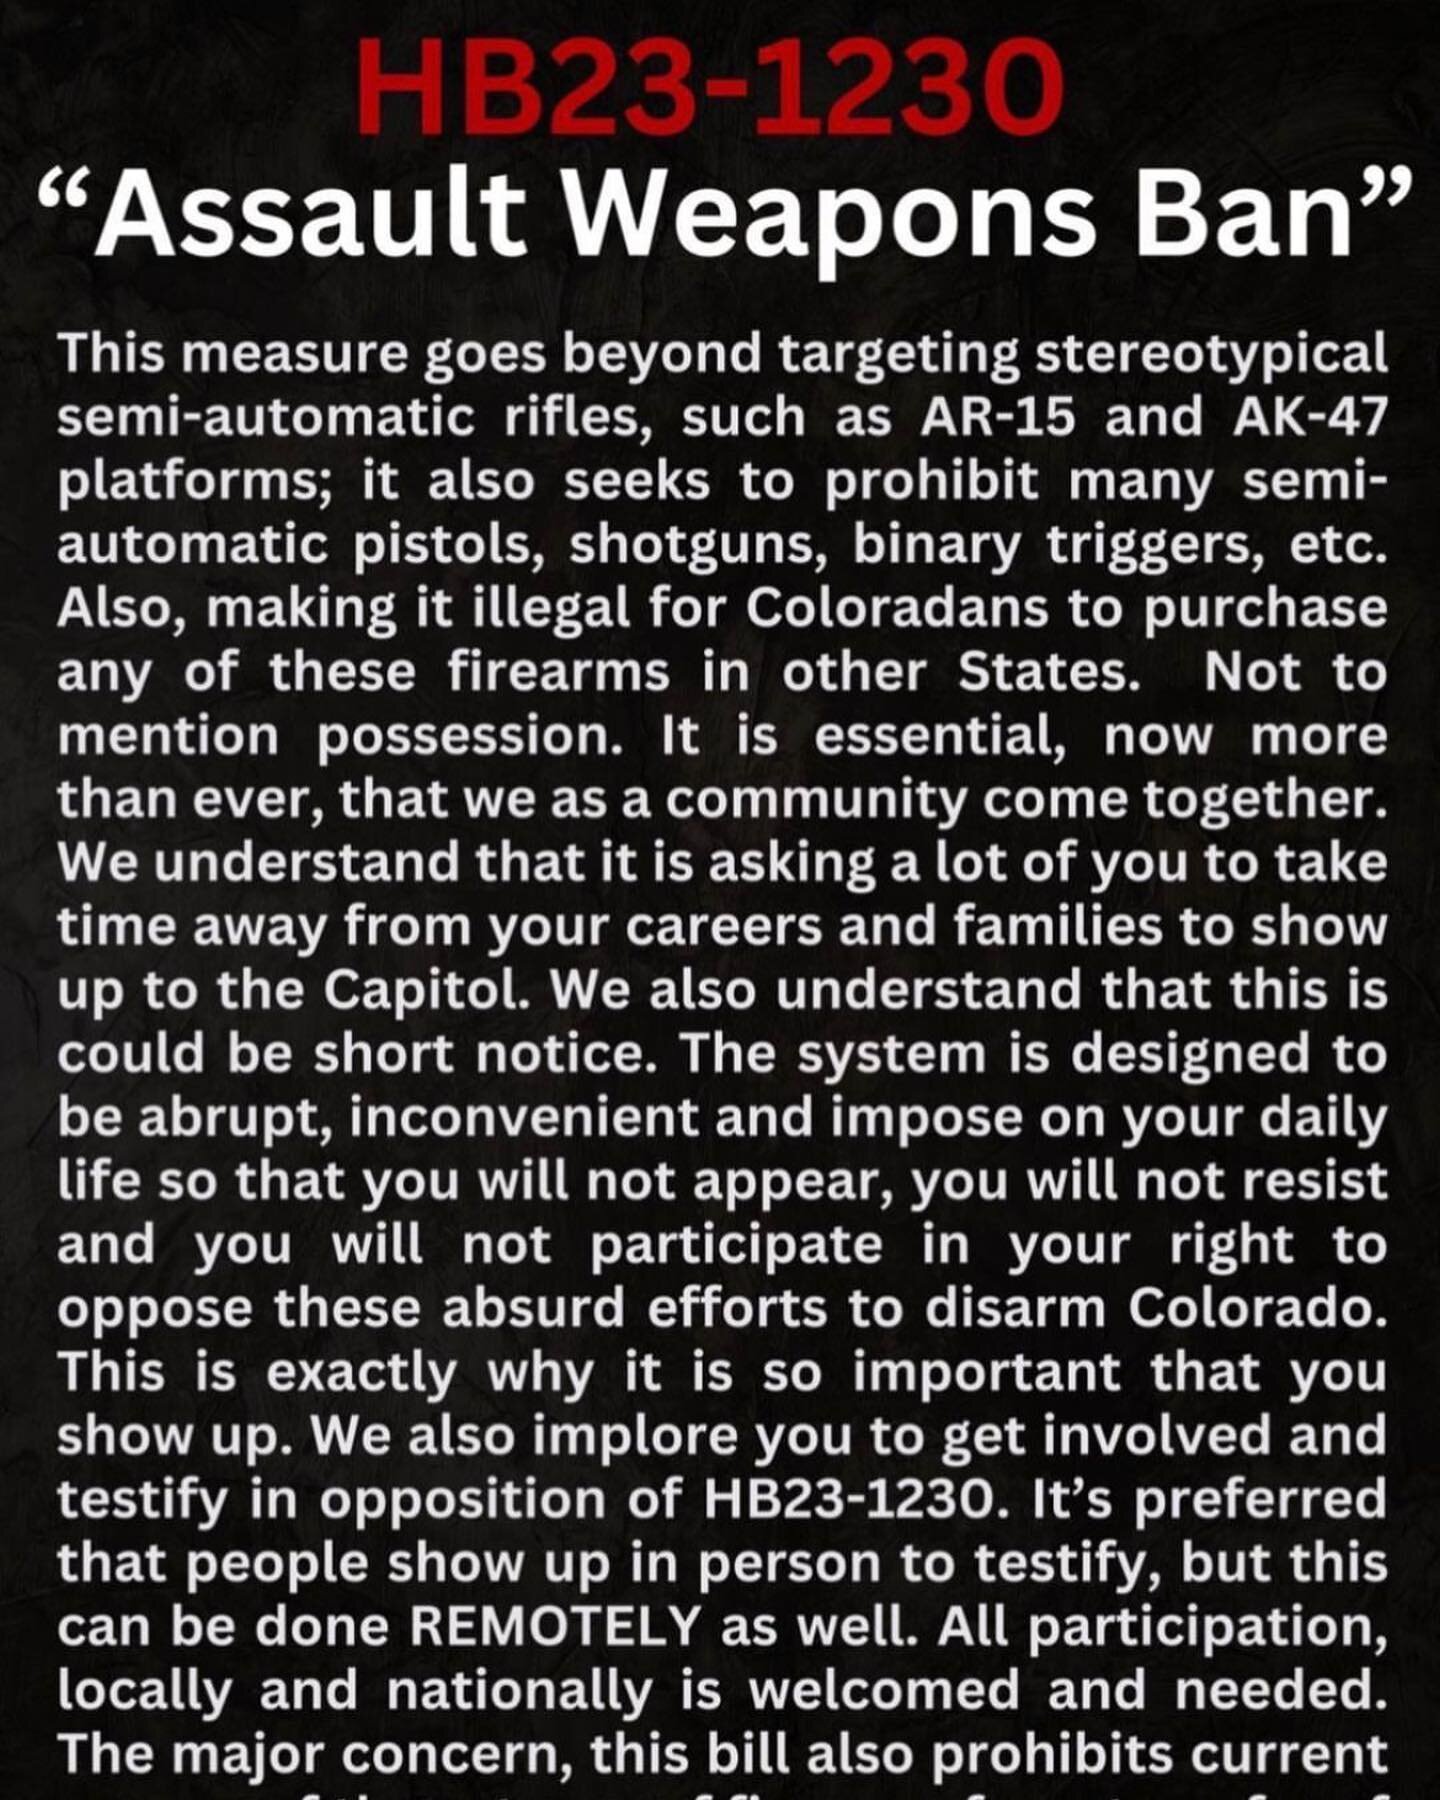 If you ruin this gun ban is going to stop the gun violence in this state you are going to be very disappointed. All this will do is take away your ability as a law abiding citizen to protect yourself. The people running this state seem to think that 